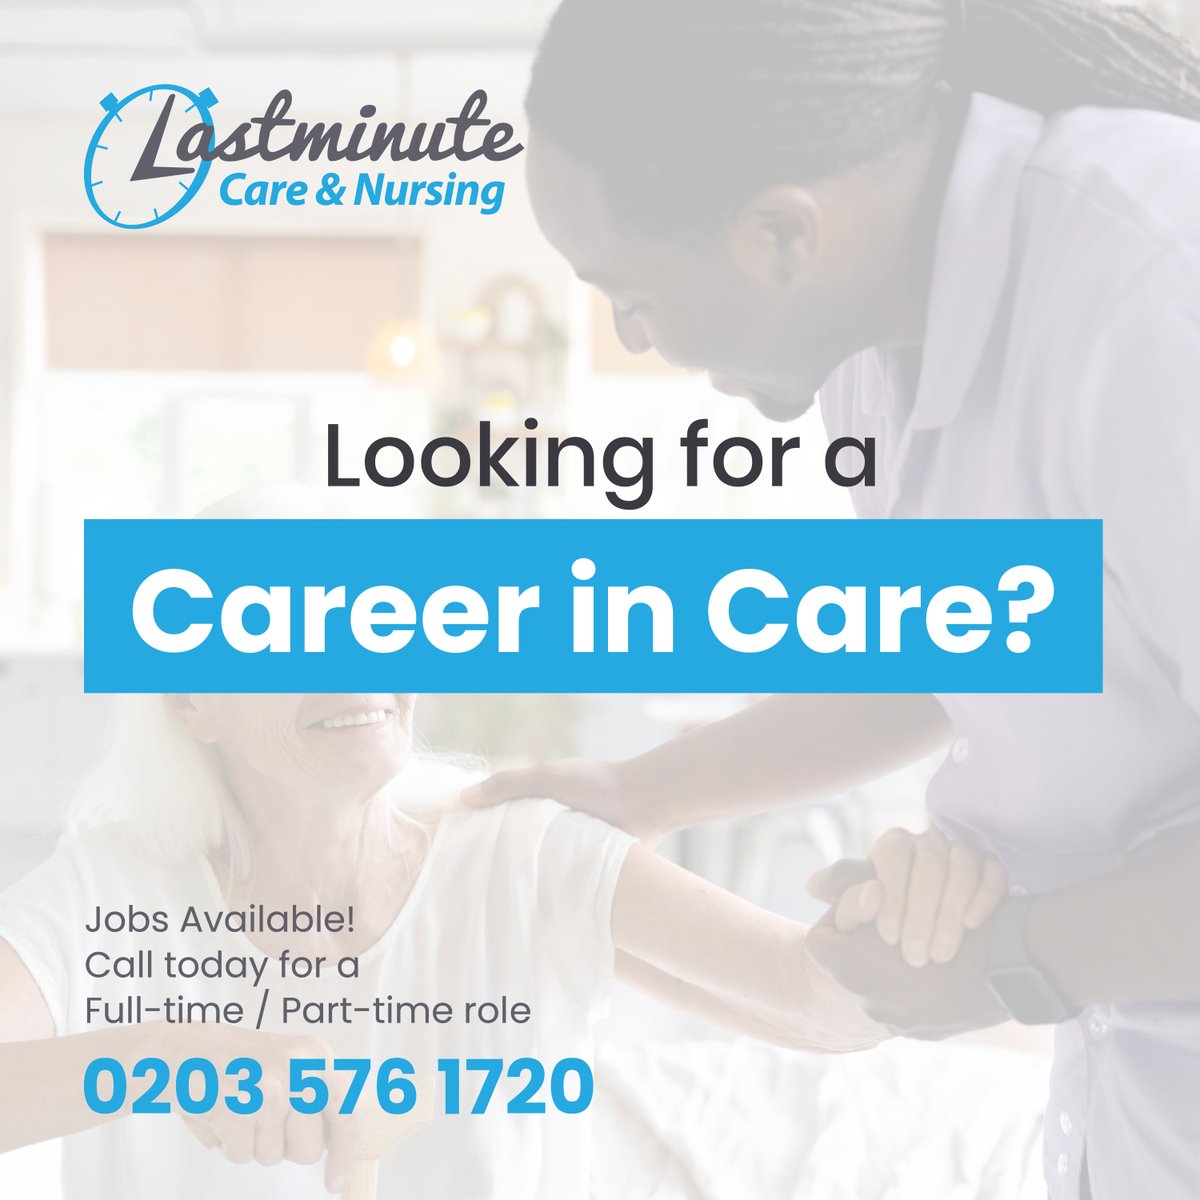 For further information email northlondon@lastminutenursing.com or call 02035761720 #CareAgency #NorthLondon #Carers #SupportWorkers #SeniorCarers